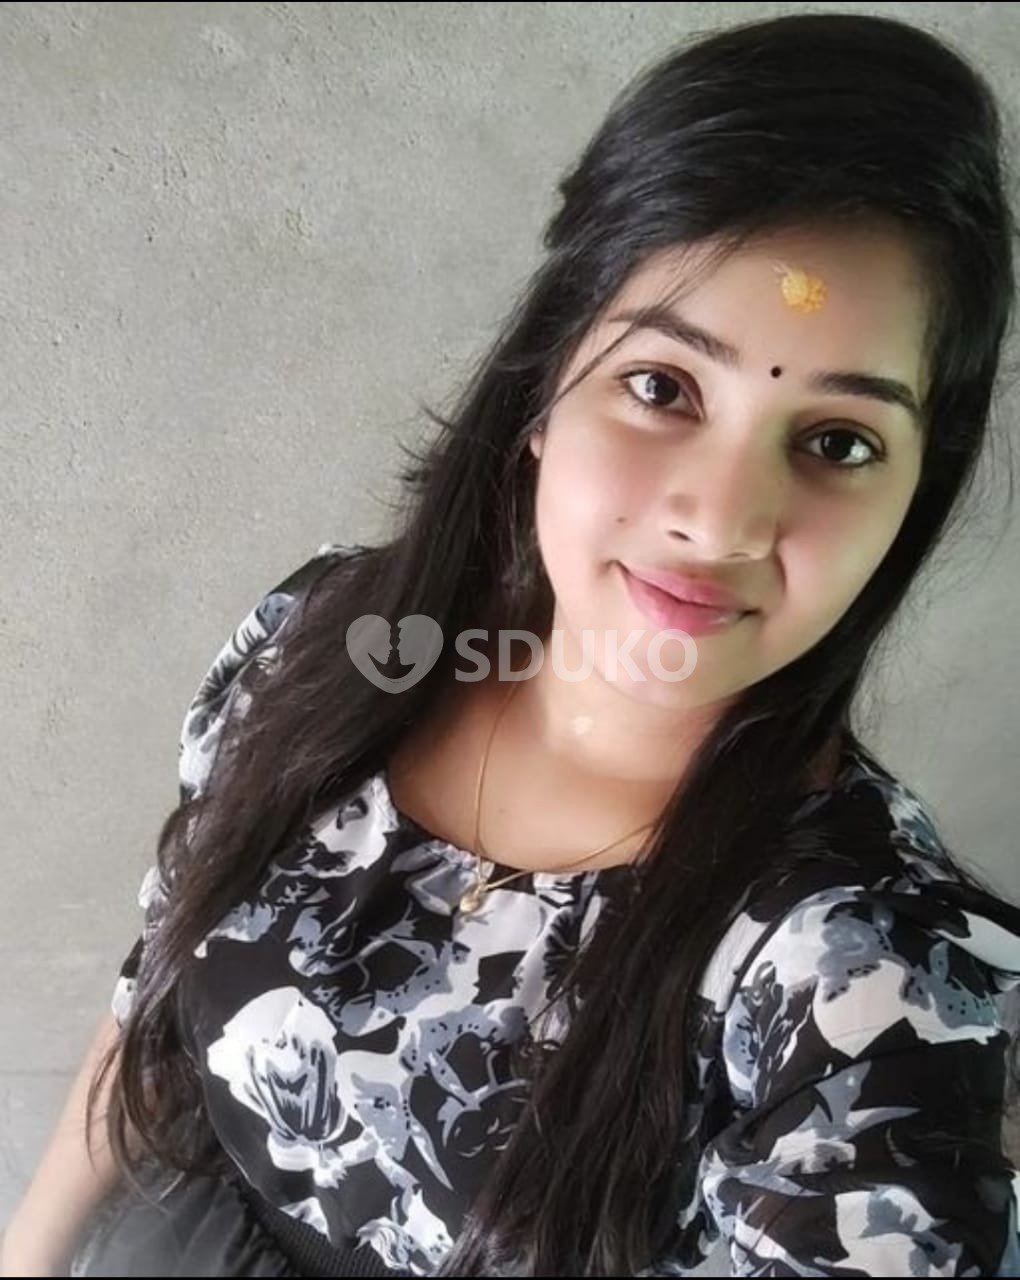 INDEPENDENT kollam new MY SELF DIVYA SHARMA 1500 UNLIMITED SHOT ENJOYMENT HIGH PROFILE GIRLS AVAILABLE About me hello ge